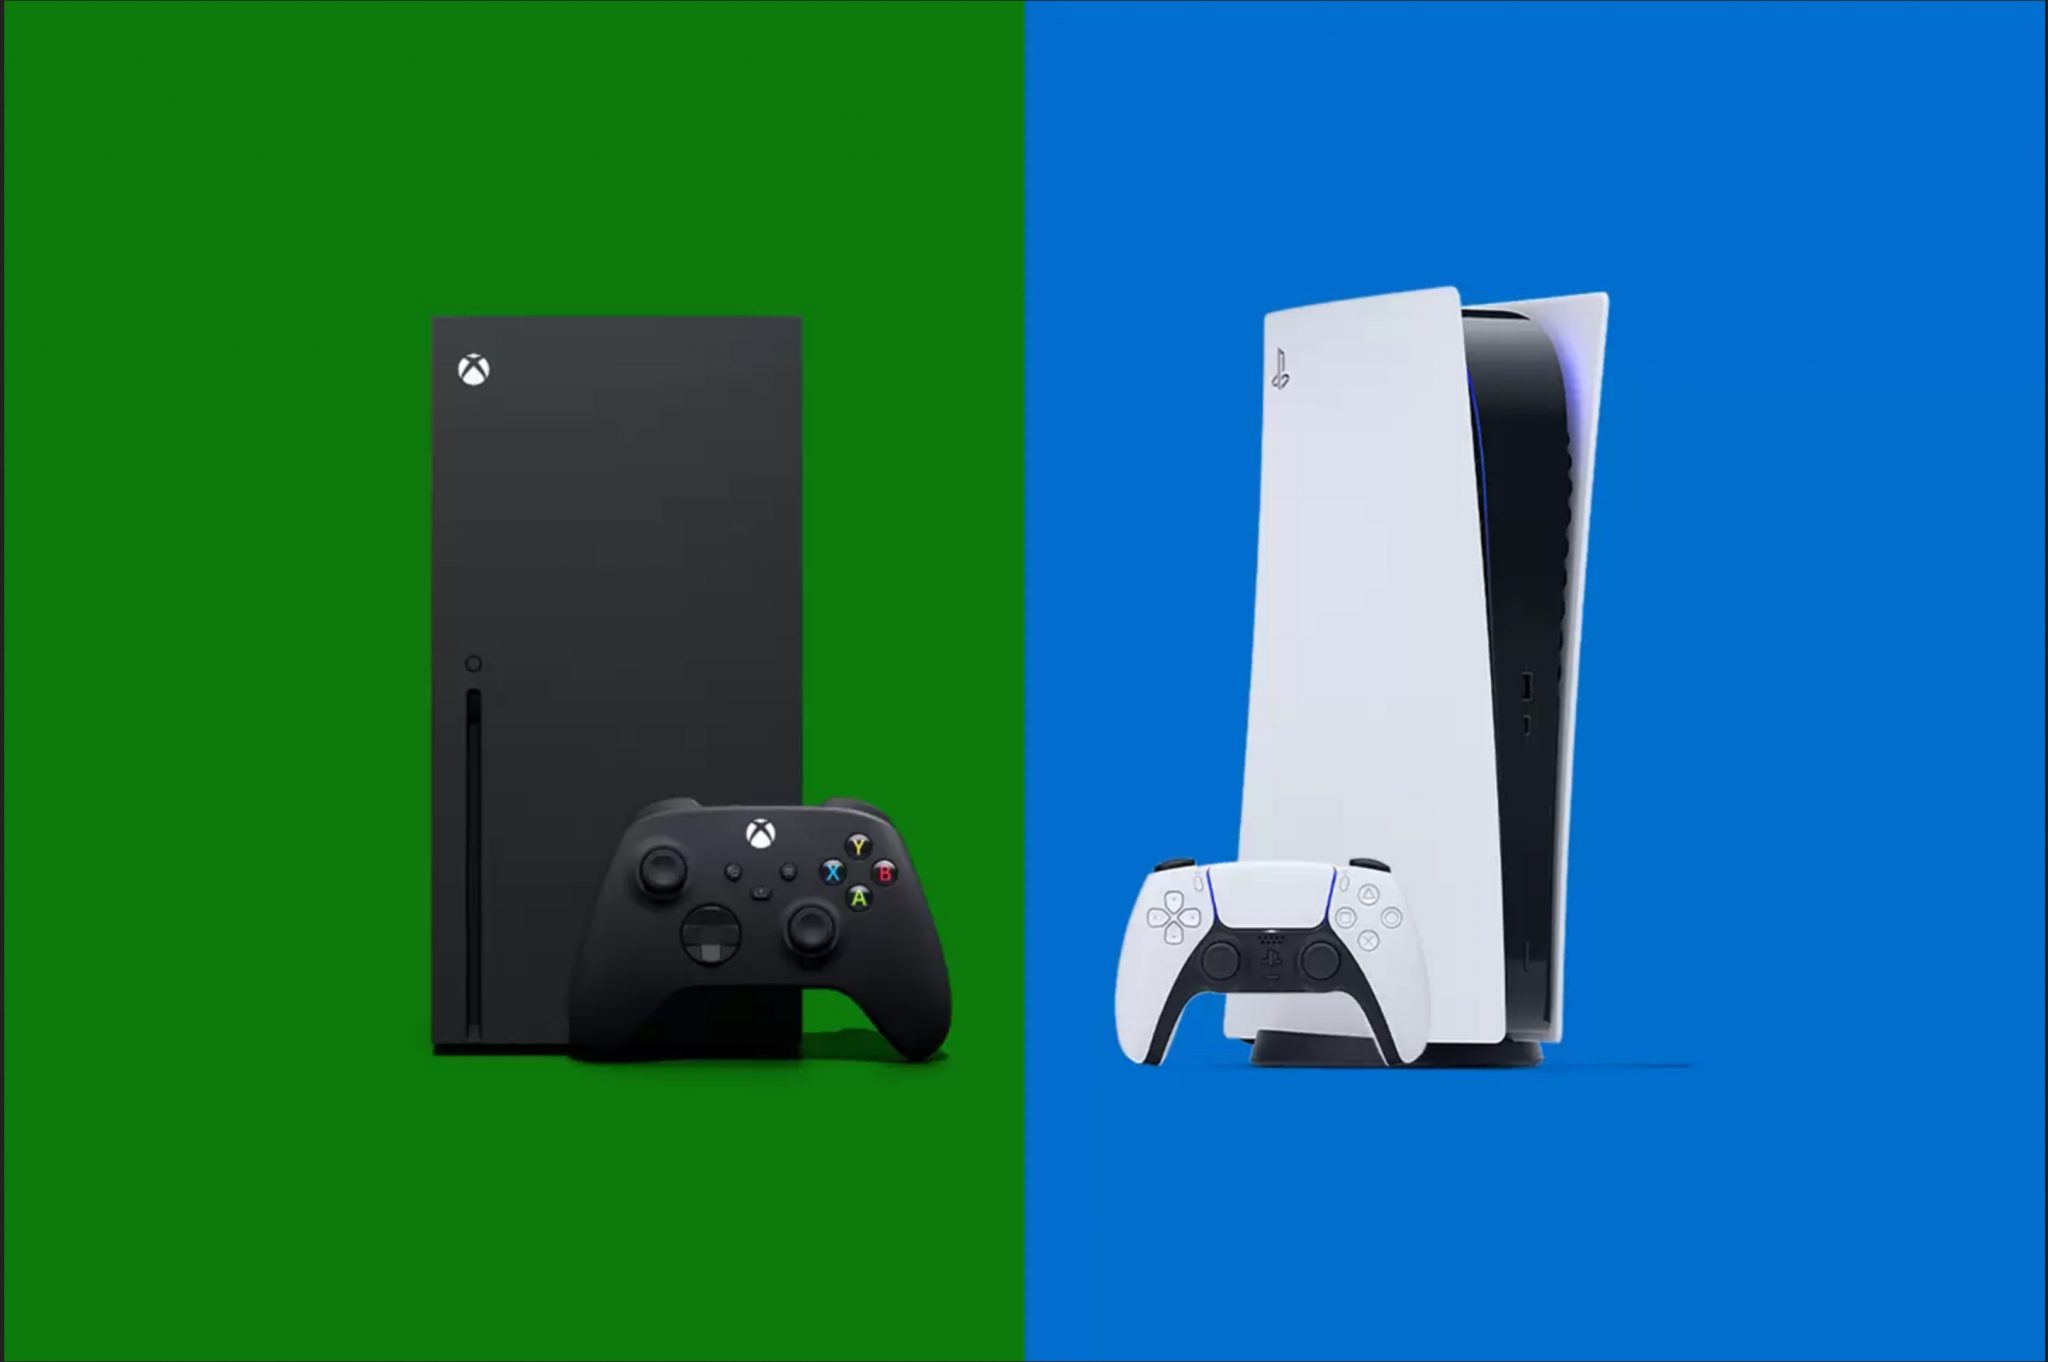 Microsoft's Expectations and Sony's Rumored Plans for PlayStation